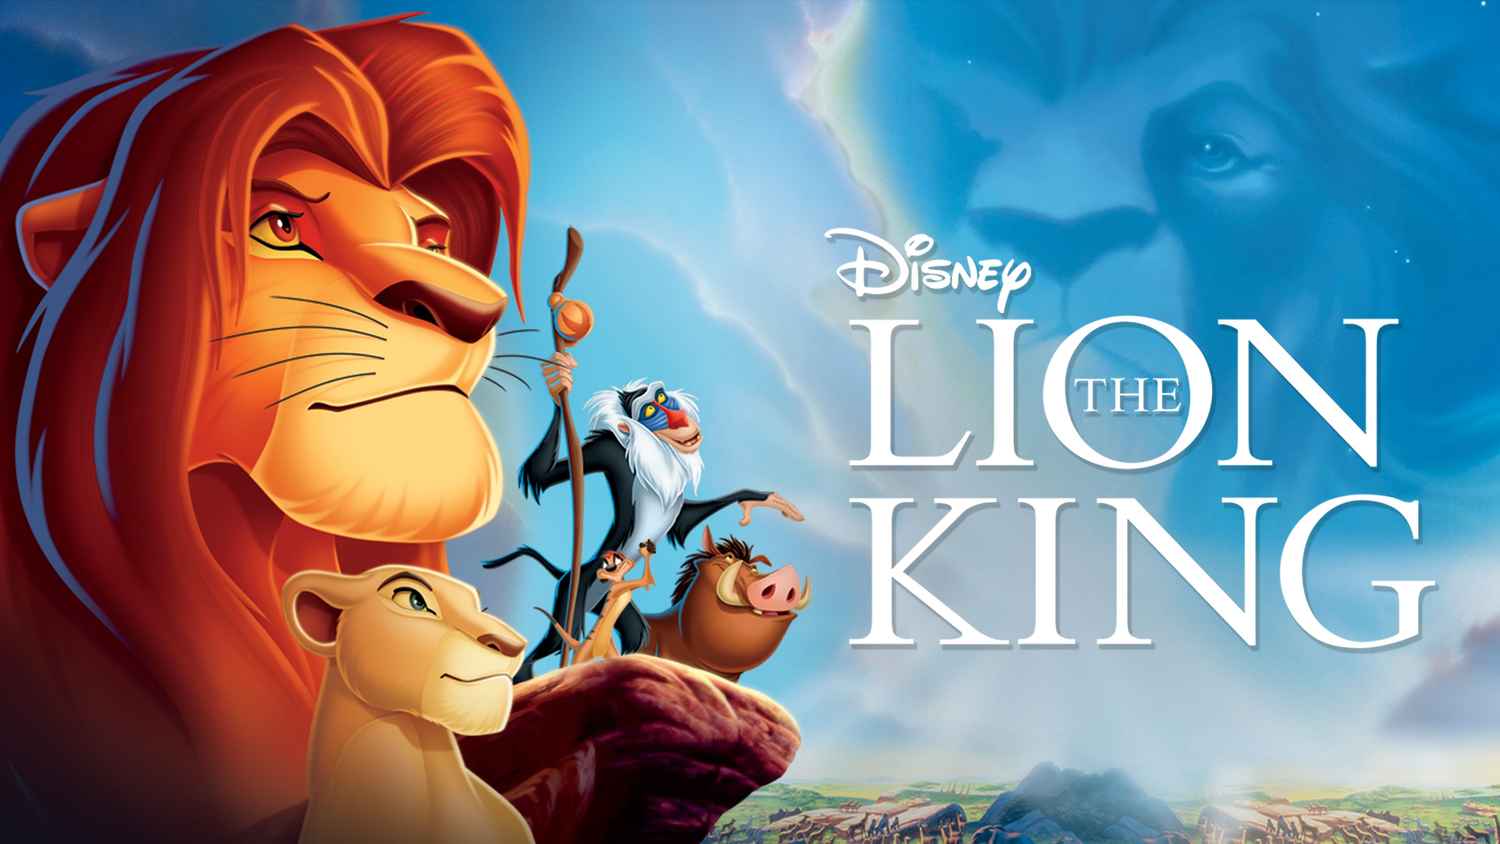 the lion king 2 full movie in hindi dubbed watch online